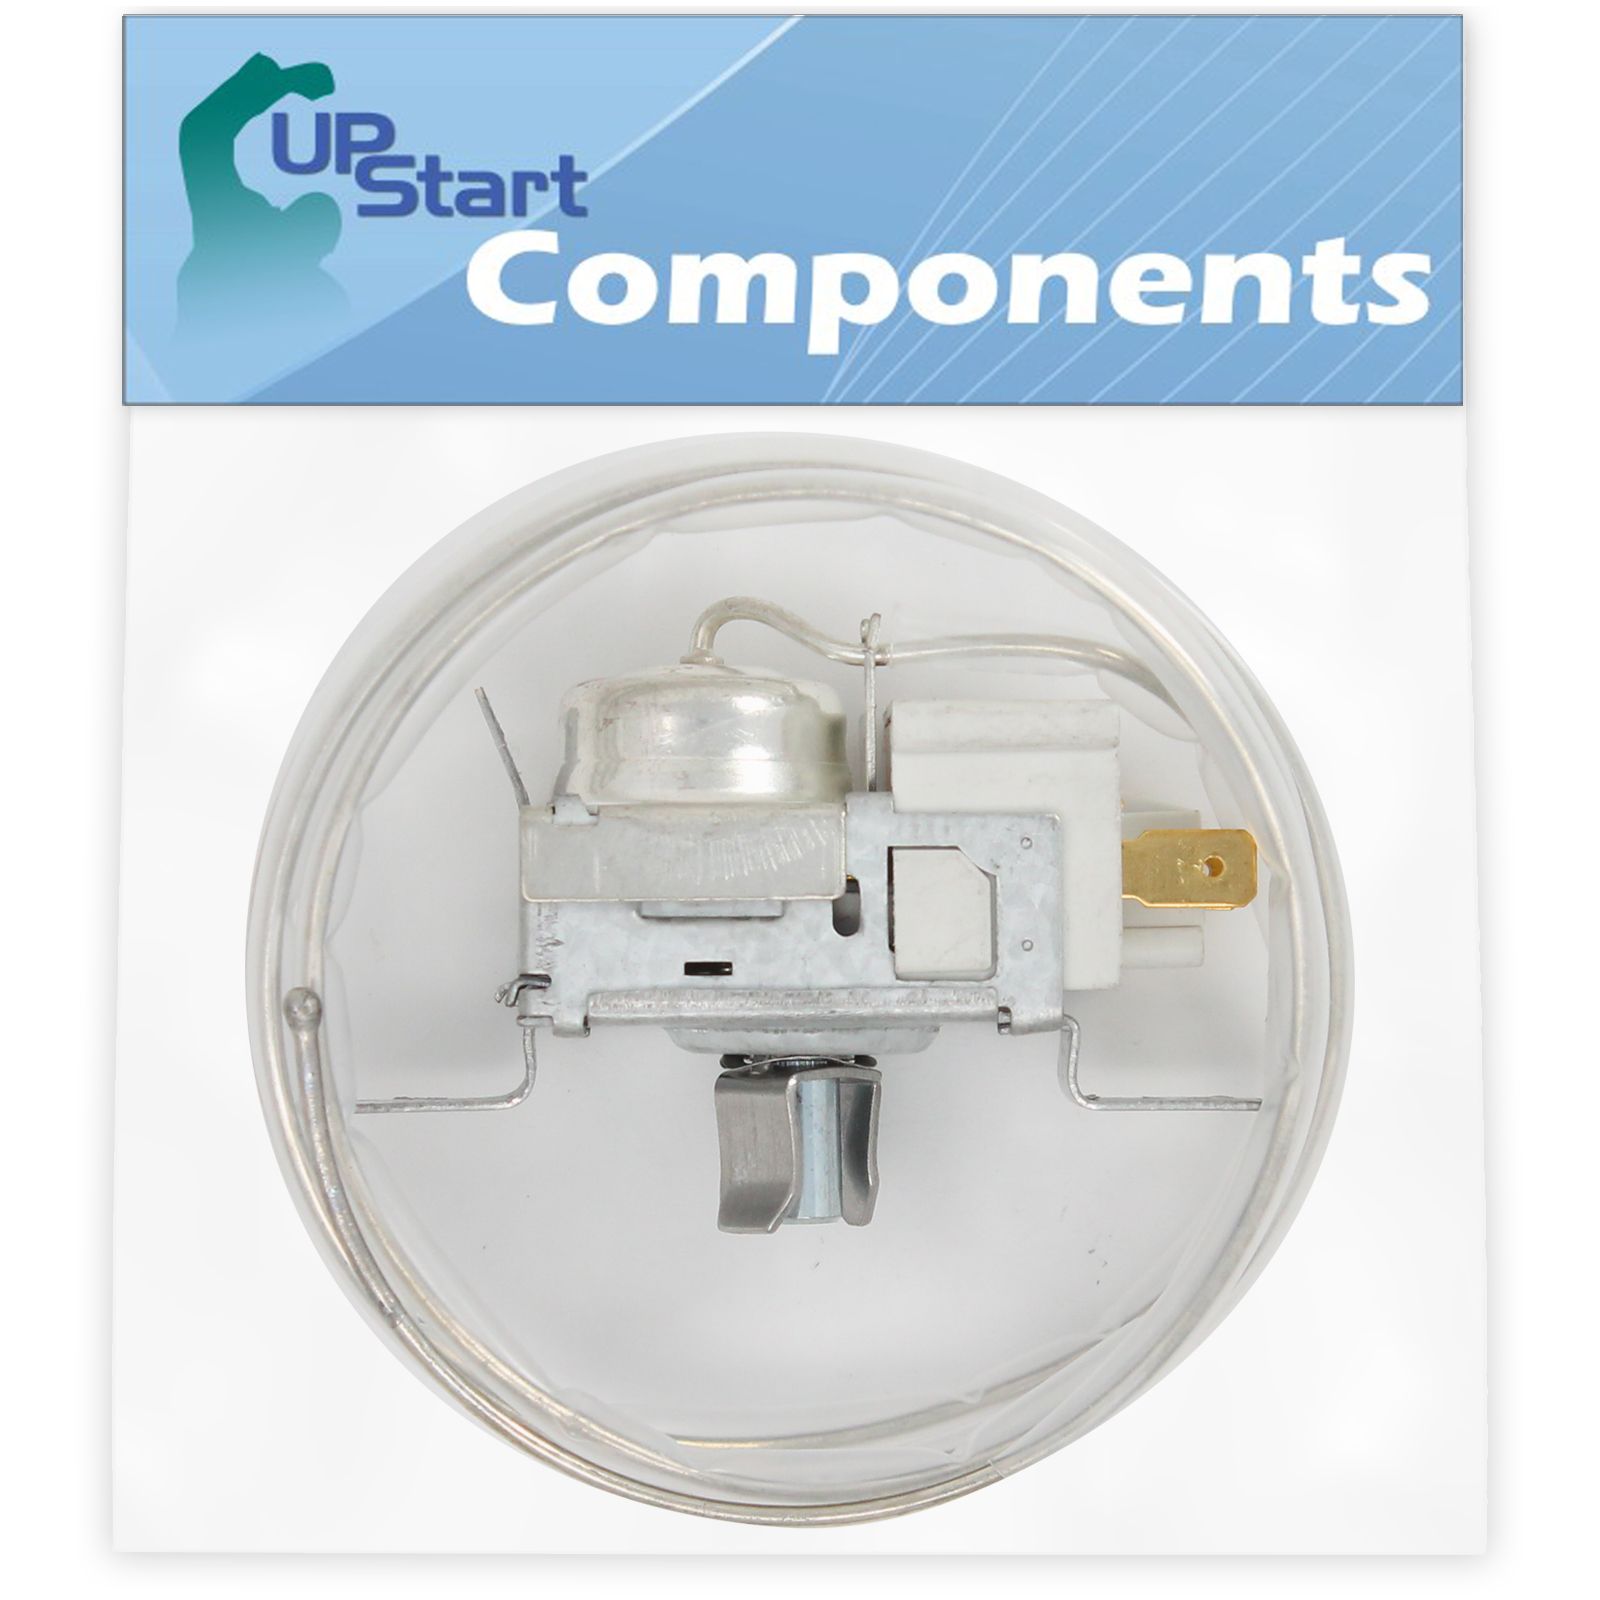 2198202 Cold Control Thermostat Replacement for Whirlpool ED5KVEXVB01 Refrigerator - Compatible with WP2198202 Refrigerator Temperature Control Thermostat - UpStart Components Brand - image 1 of 3